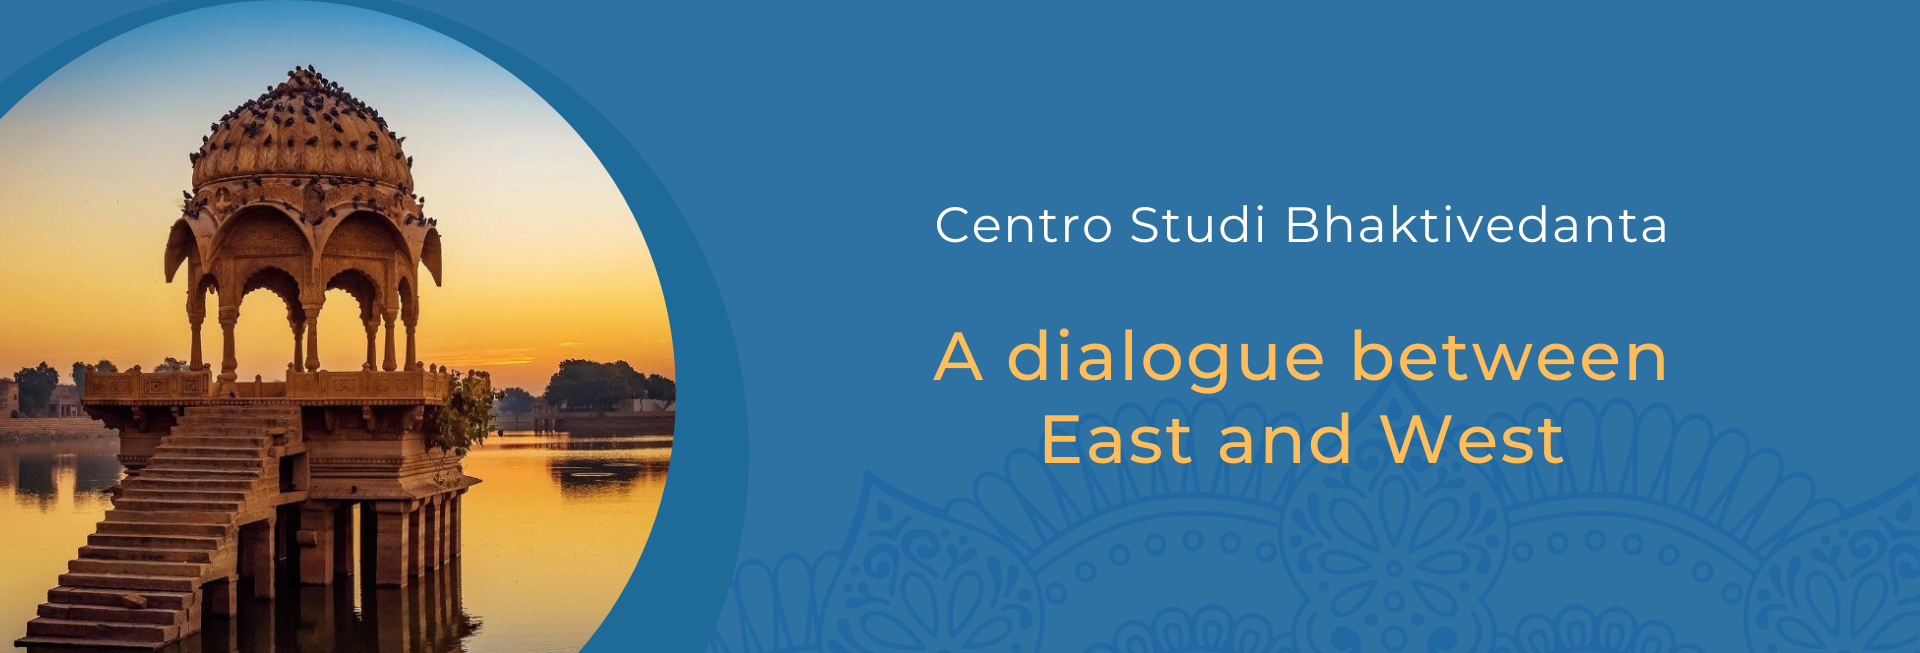 CSB: a dialogue between East and West